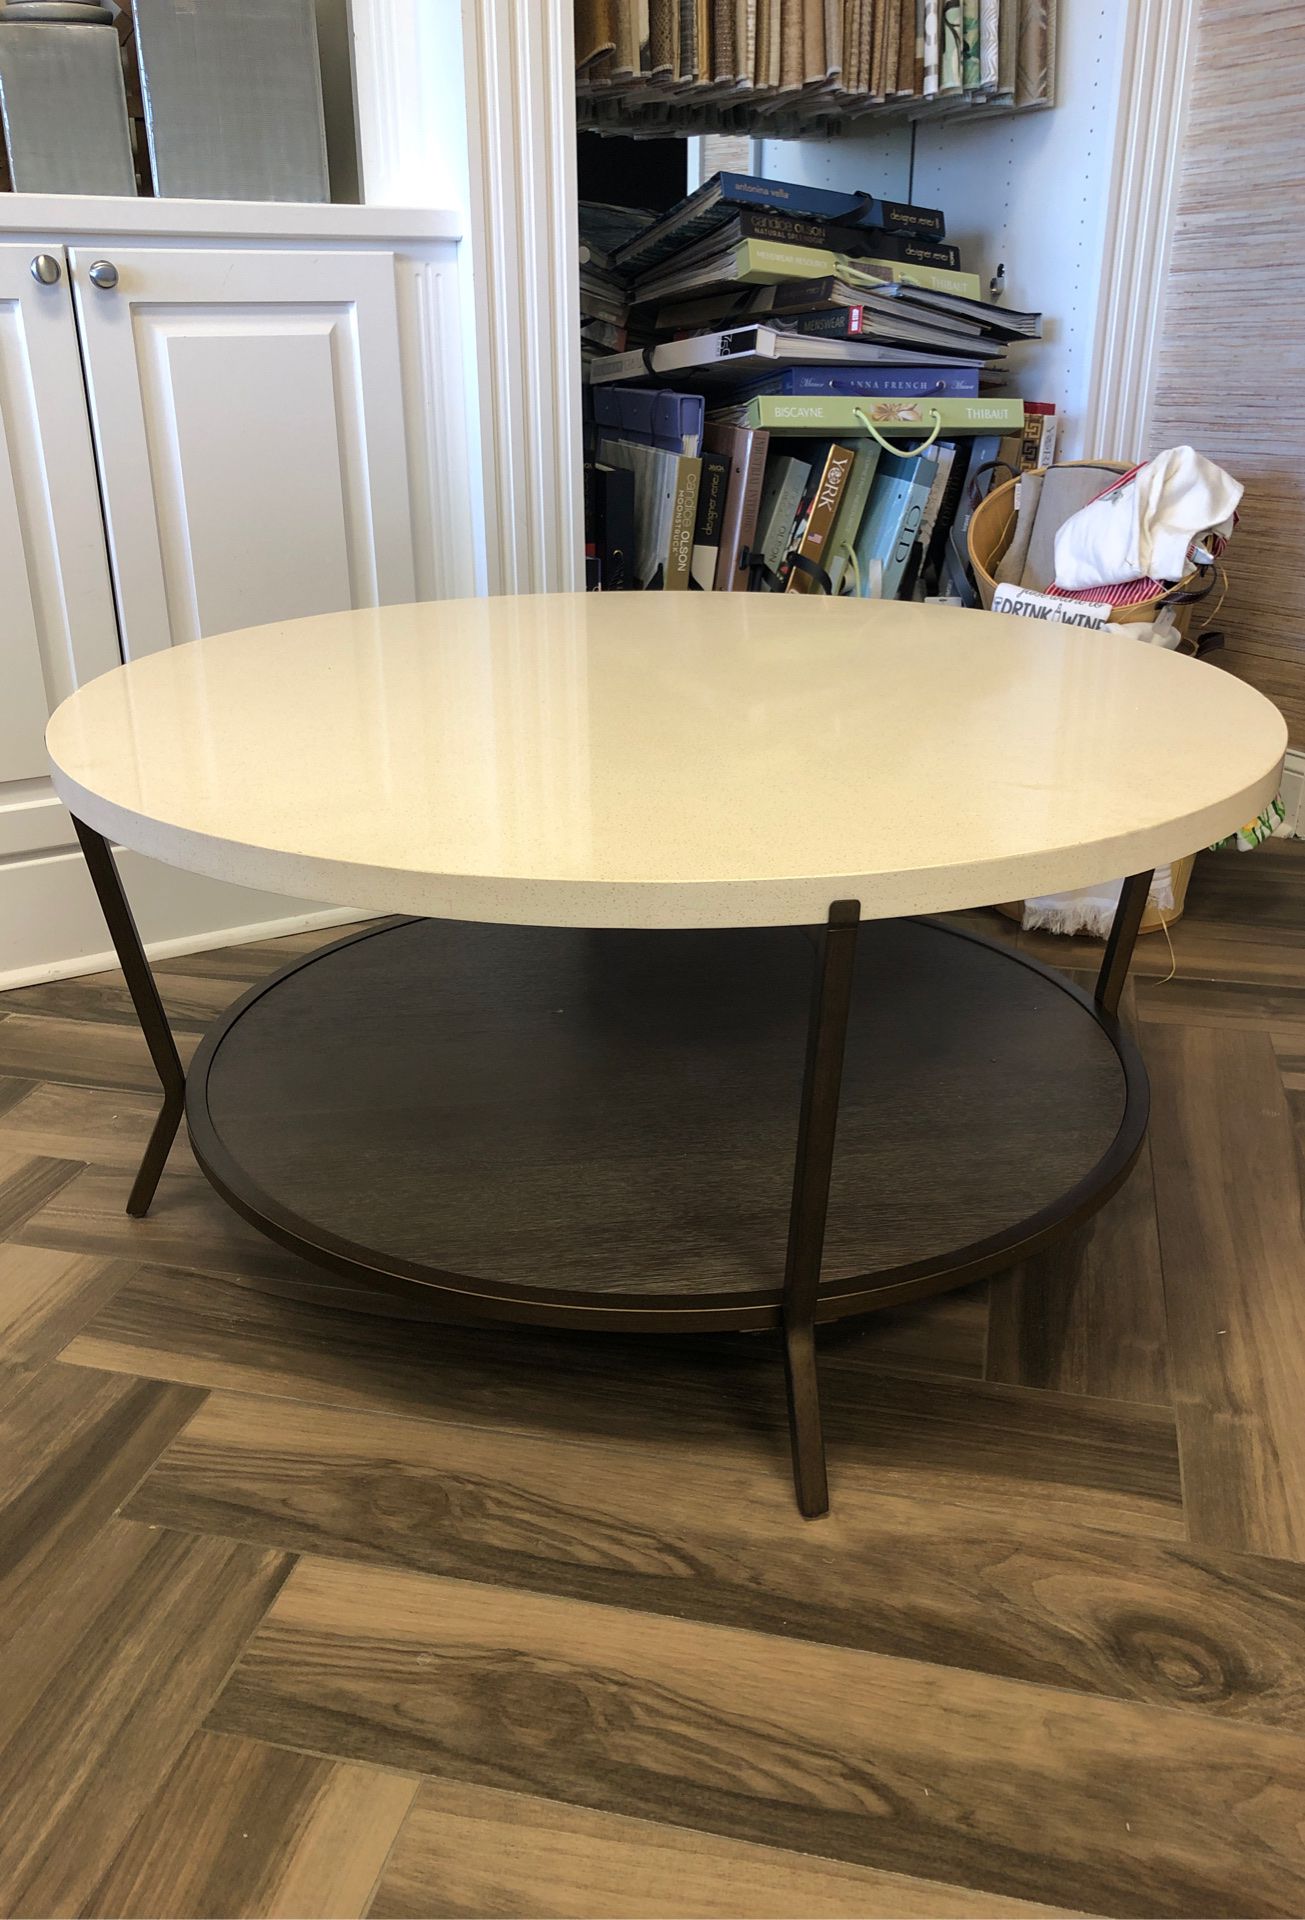 42” round 19” high coffee table.